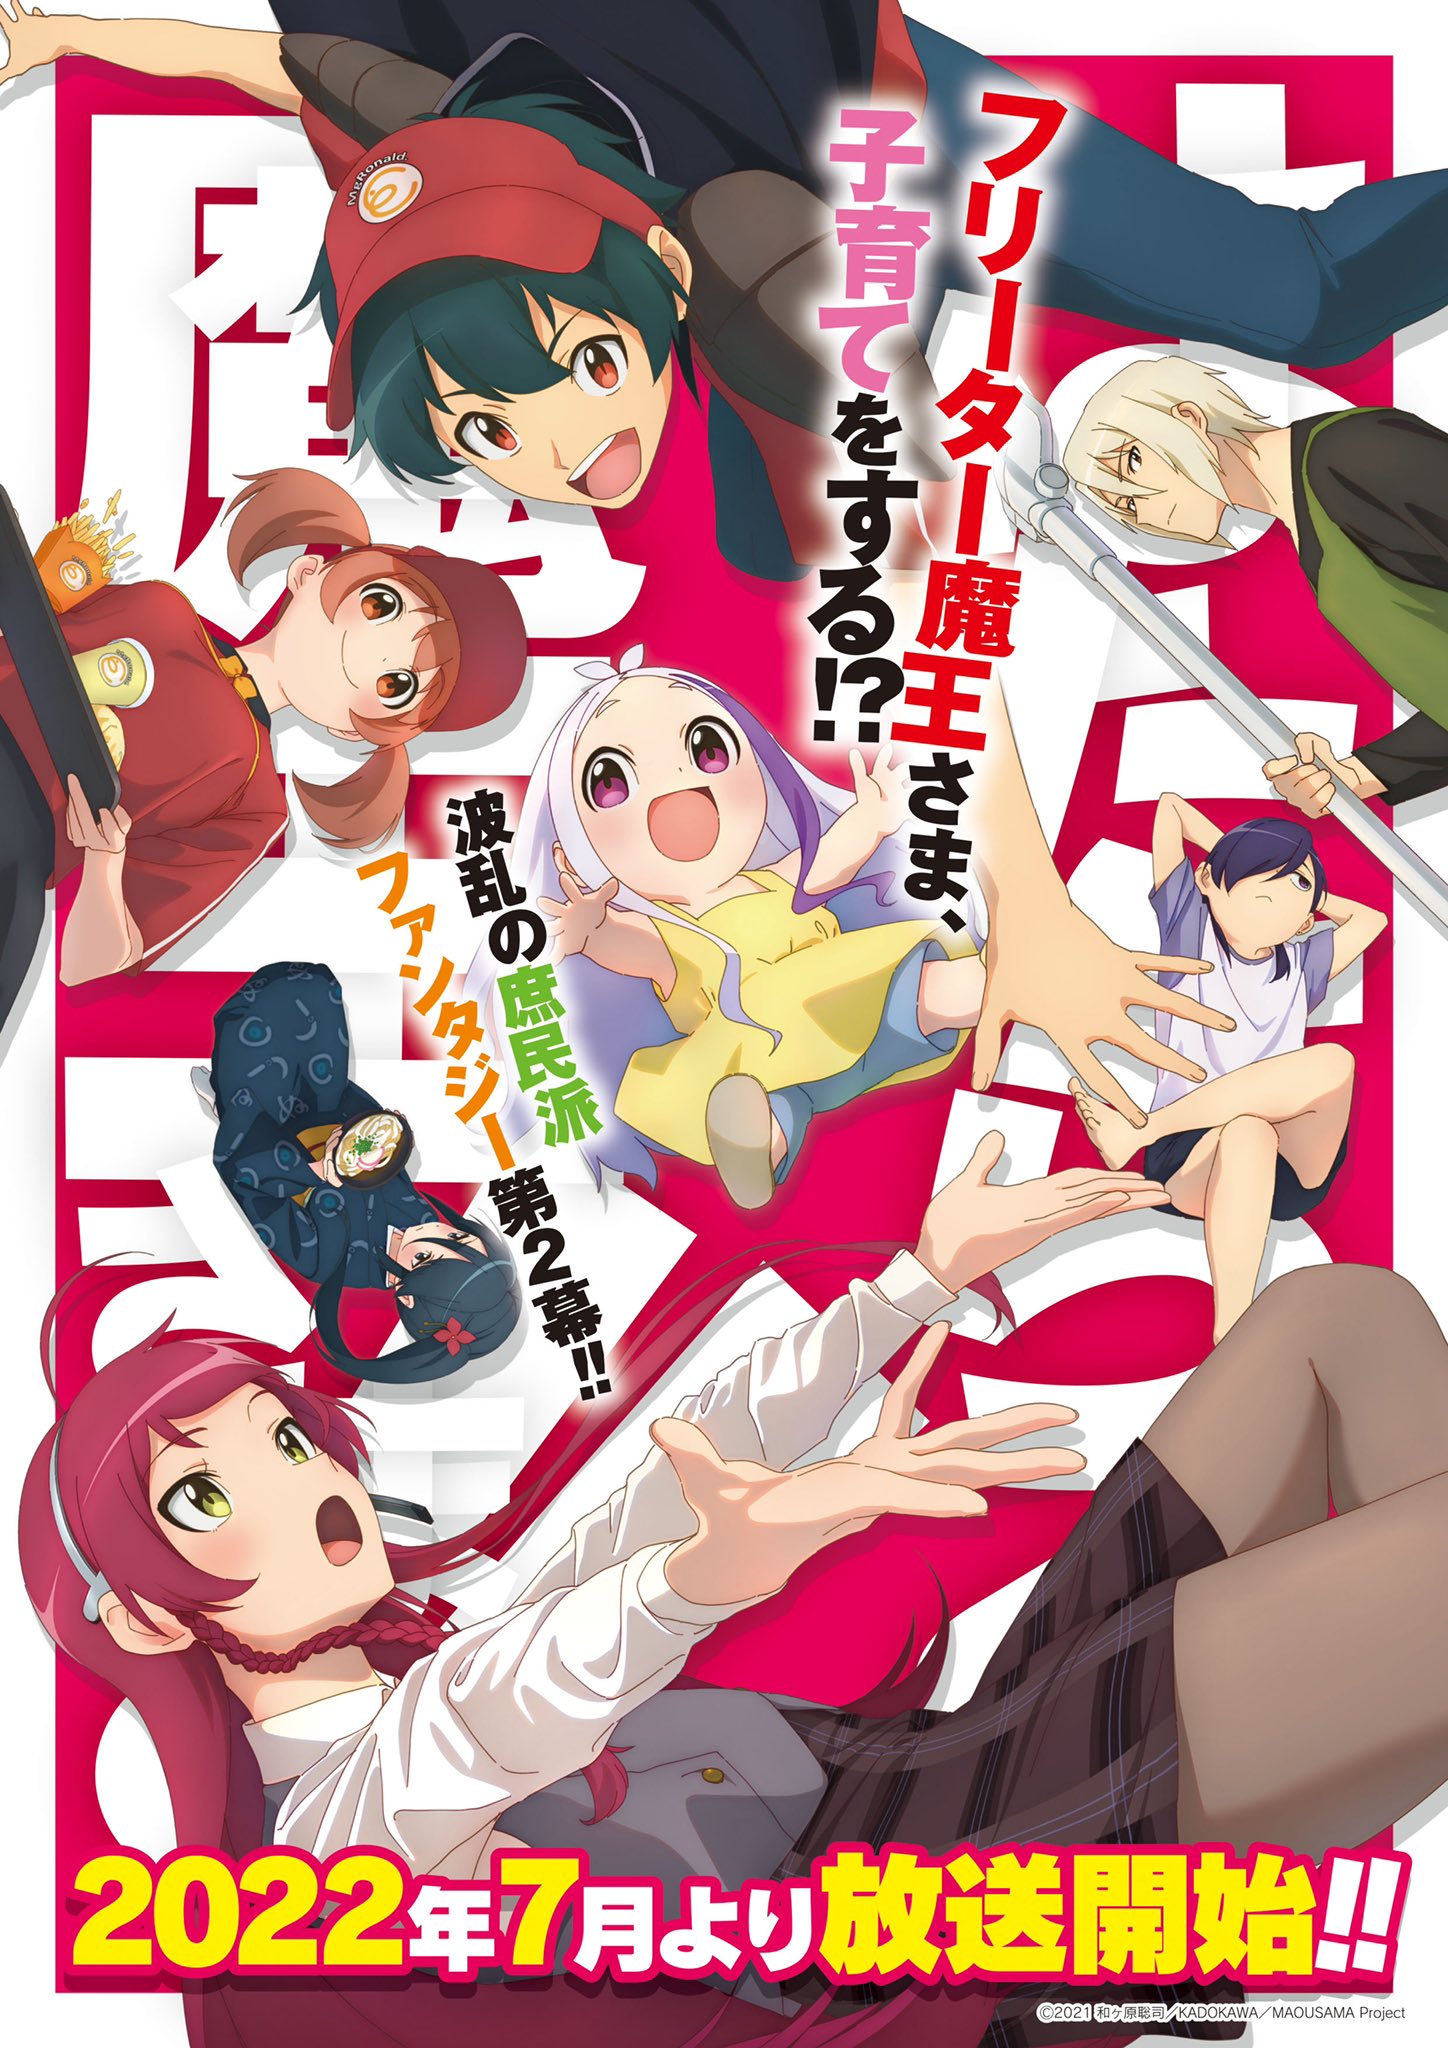 The Devil Is A Part-Timer Teases New Announcements For Season 2